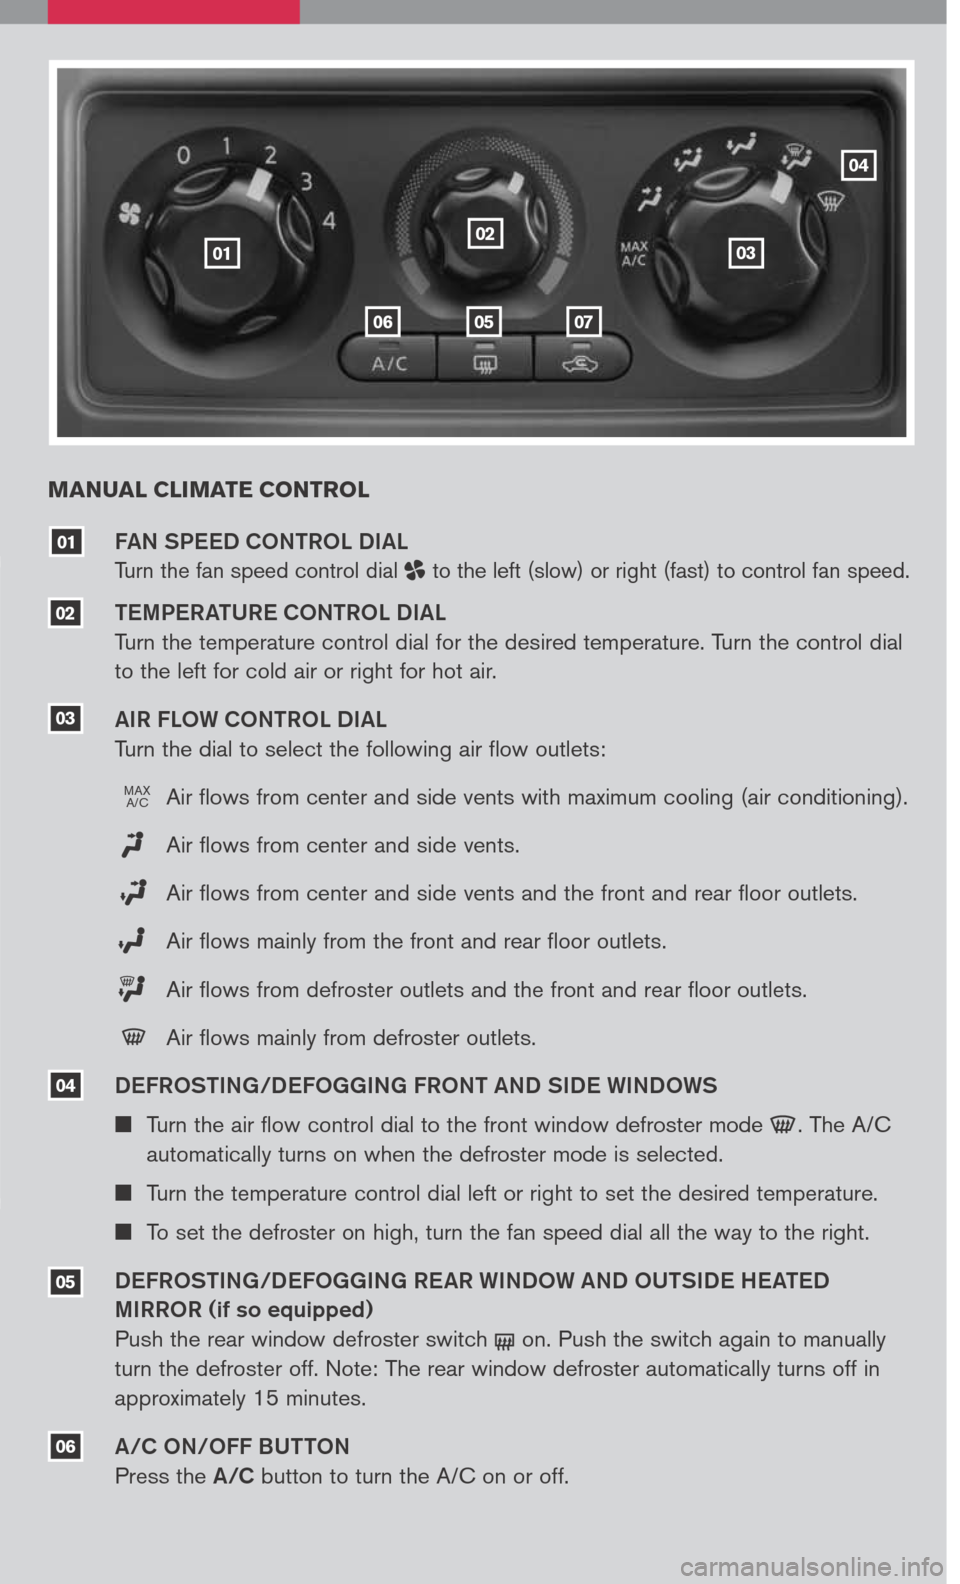 NISSAN XTERRA 2007 N50 / 2.G Quick Reference Guide 
MANUAL CLIMATE CONTROL
FAN SPEED CONTROL DIAL 
Turn the fan speed control dial  to the left (slow) or right (fast) to control fan speed. 
TEMPERATURE CONTROL DIAL 
Turn the temperature control dial f